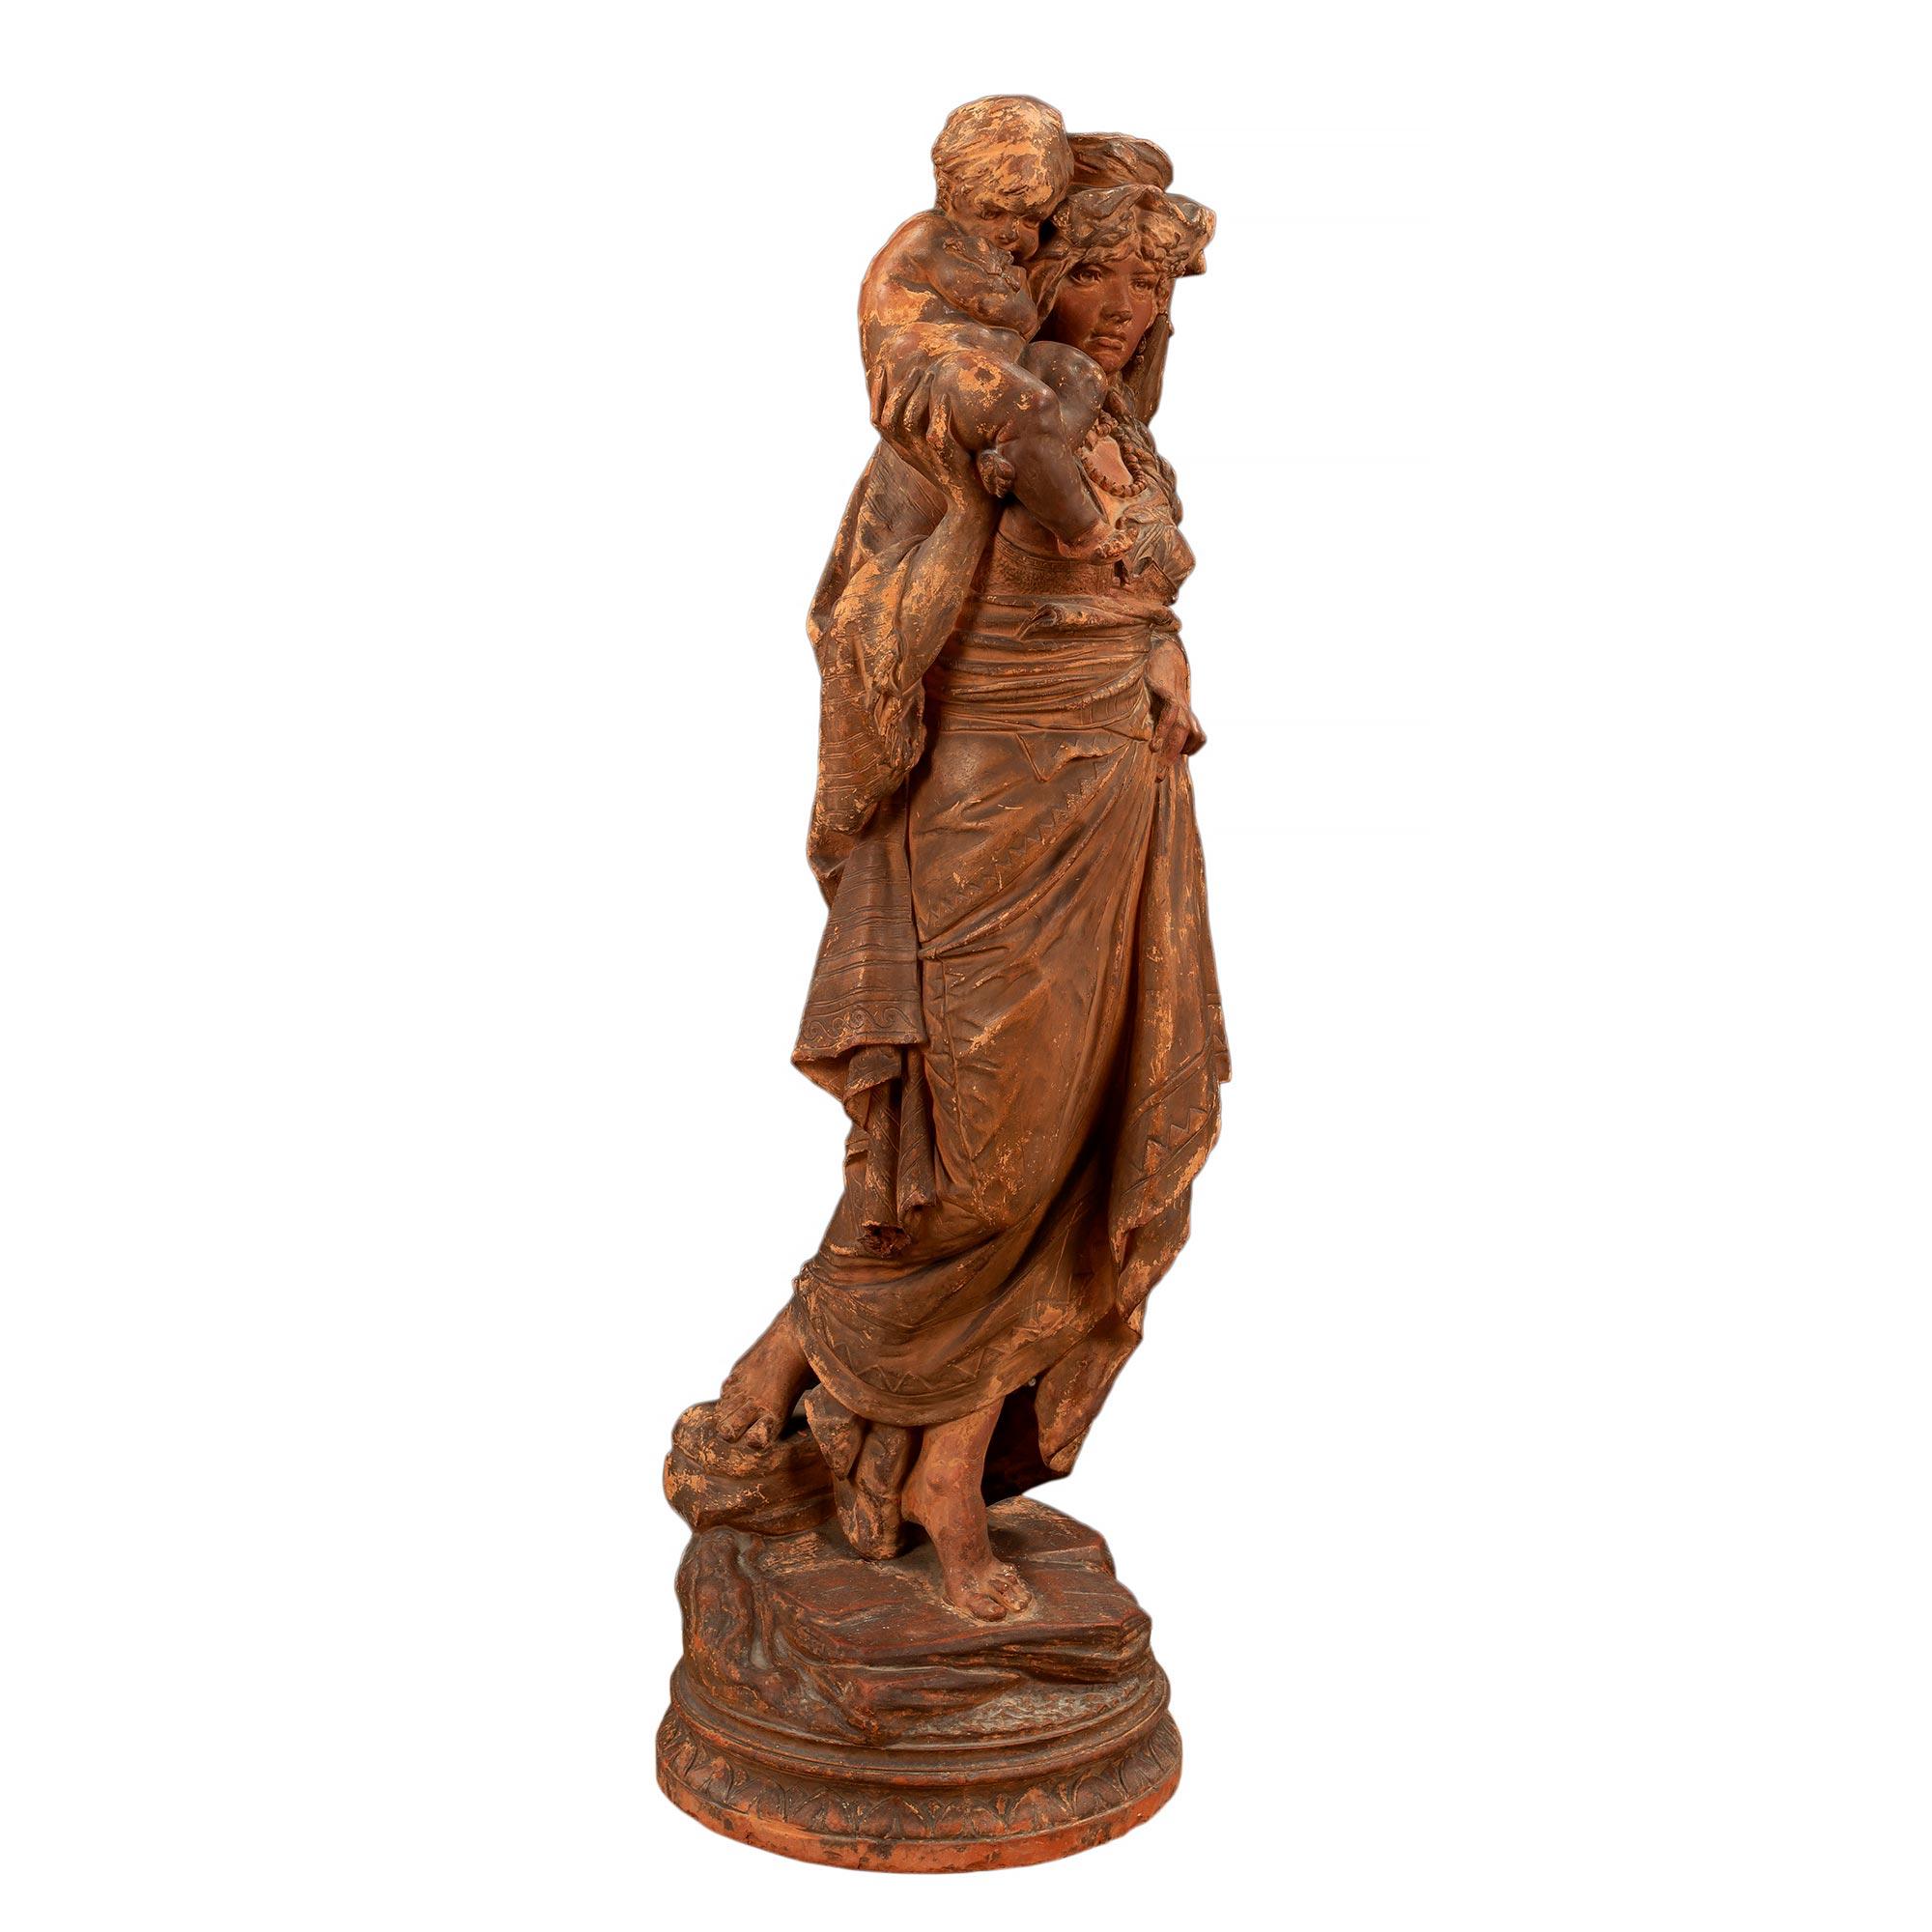 A wonderful French 18th century terra cotta signed statue of mother and child. The statue is raised on a circular terrain designed base. The woman is barefoot donned in a traditional gown with a pearl styled necklace and head dress. the woman is